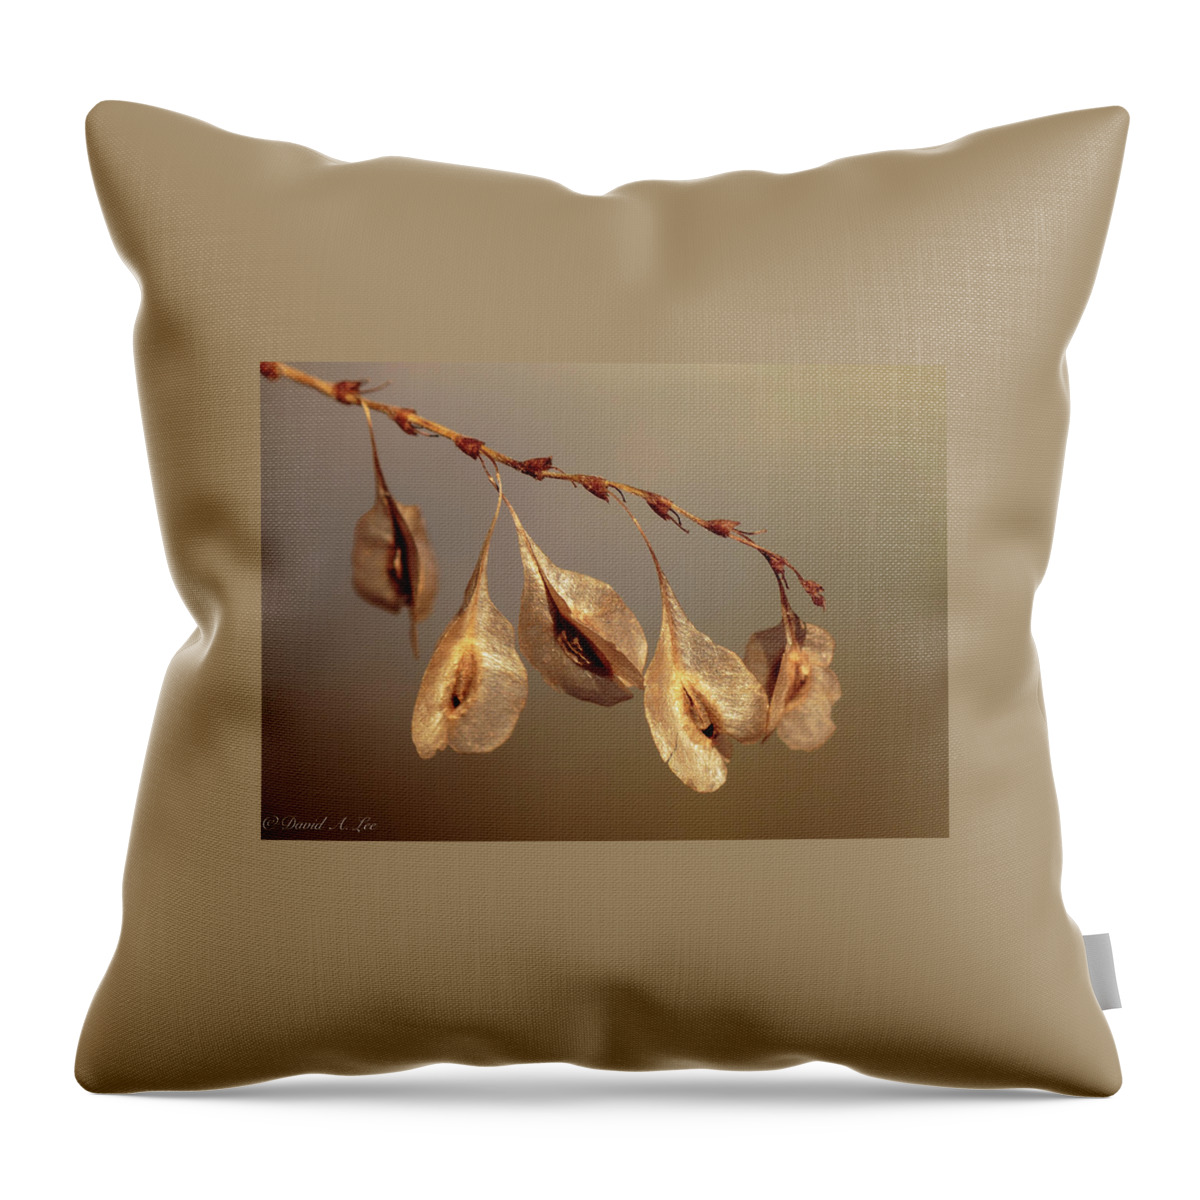 Flowers Throw Pillow featuring the photograph Seed Pods by David Lee